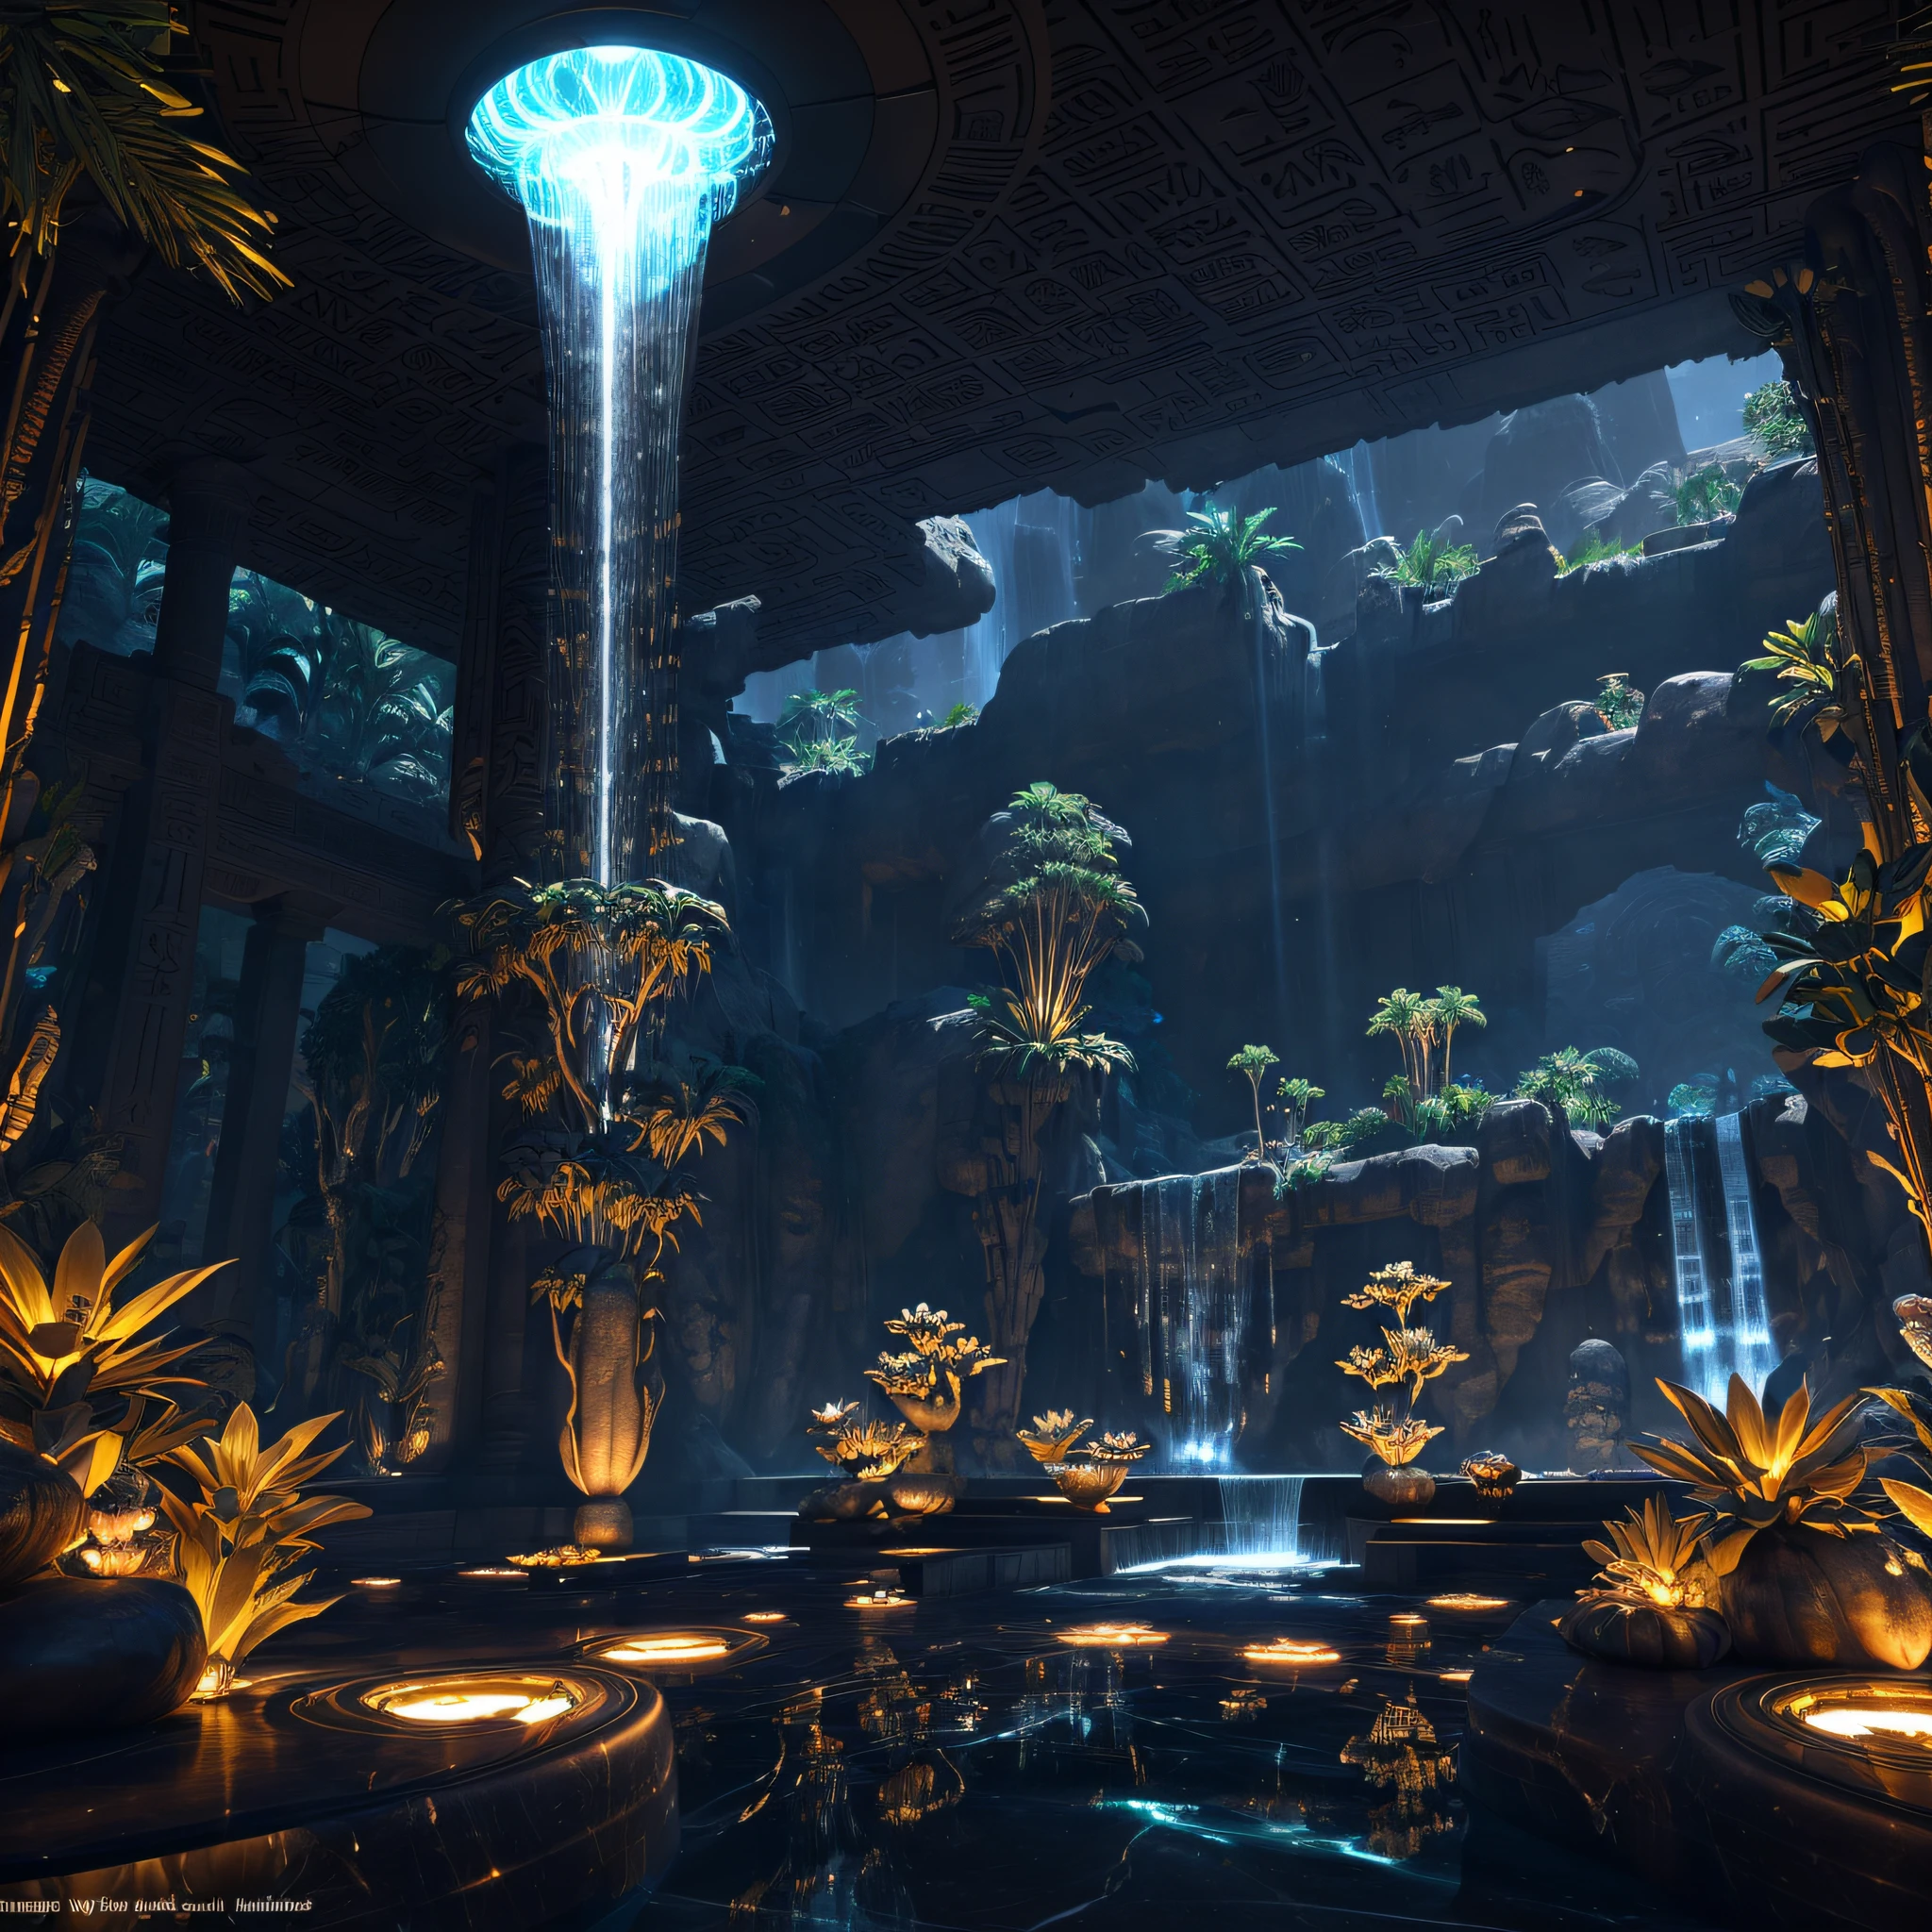 incredible black luxurious futuristic interior in Ancient Egyptian style with many ((lush plants)) (lotus flowers), ((palm trees)), rocky walls, (sand), ((waterfalls)) (marble), ((precious minerals)), ((metals)), (gemstones), crystals, clouds and (water), crocodiles, (hieroglyphics), (((ultra luxury))), (black marble) – with ((beautiful lights)), Cherry blossoms, Unreal Engine, HQ, 16k